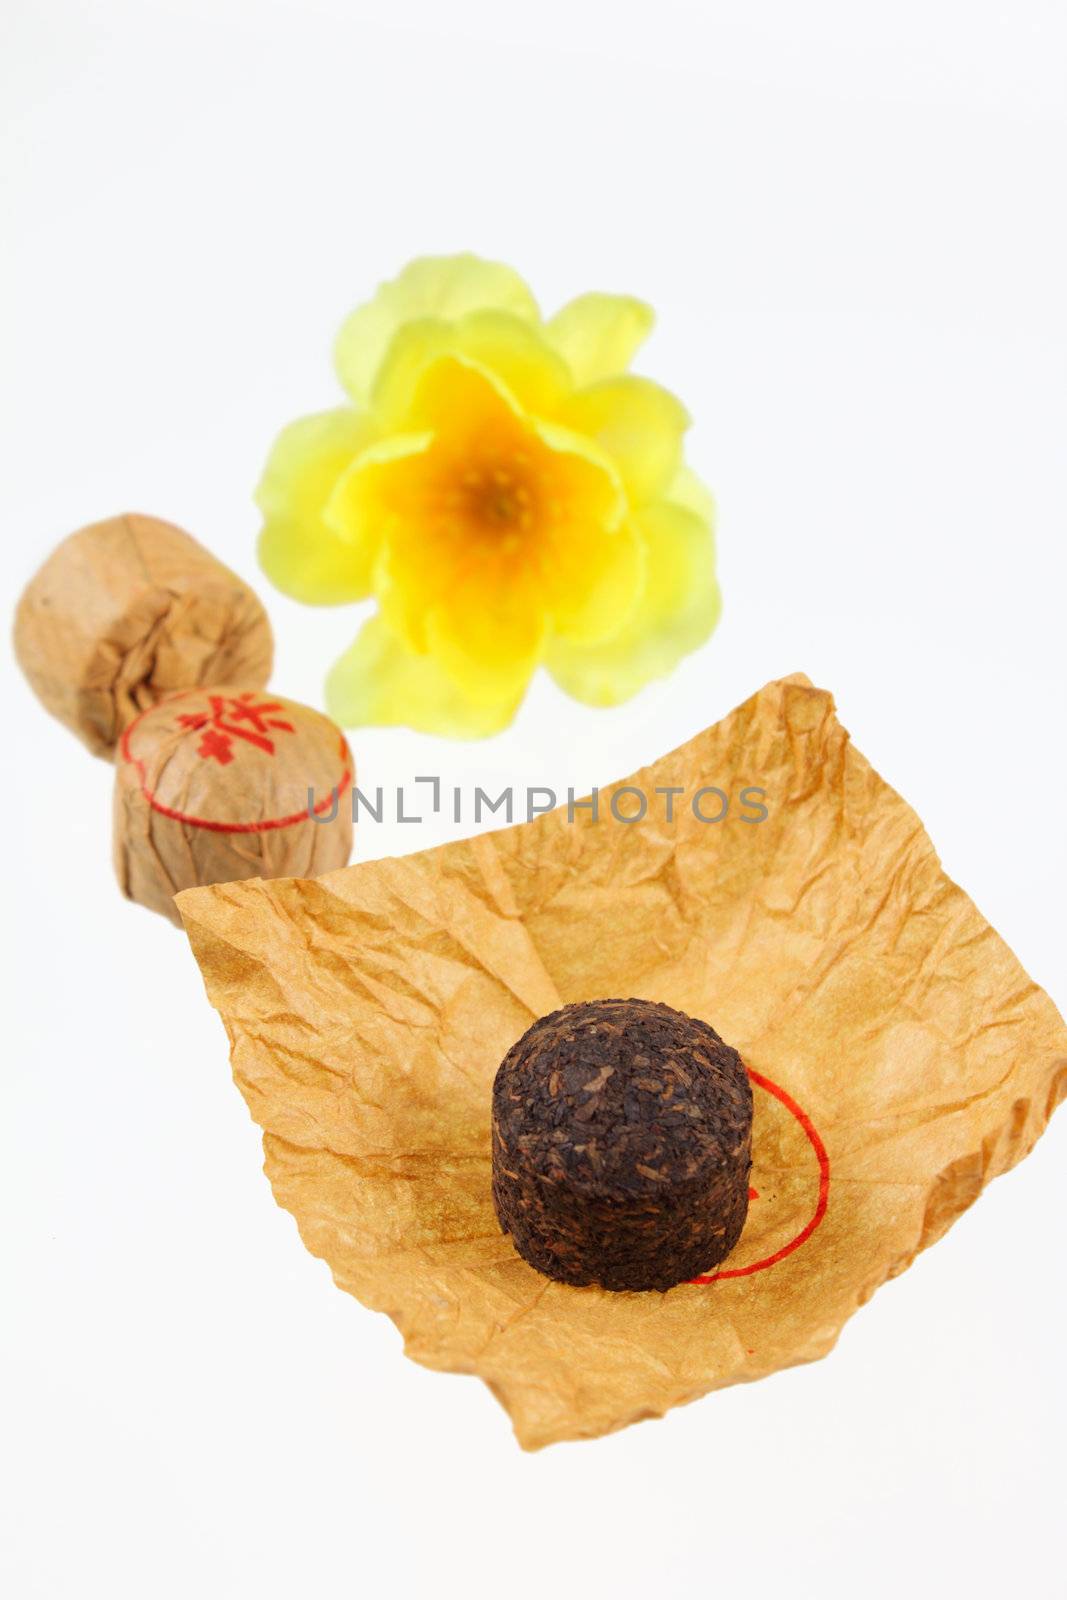 The pressed tea removed against a yellow flower on a white background without isolation